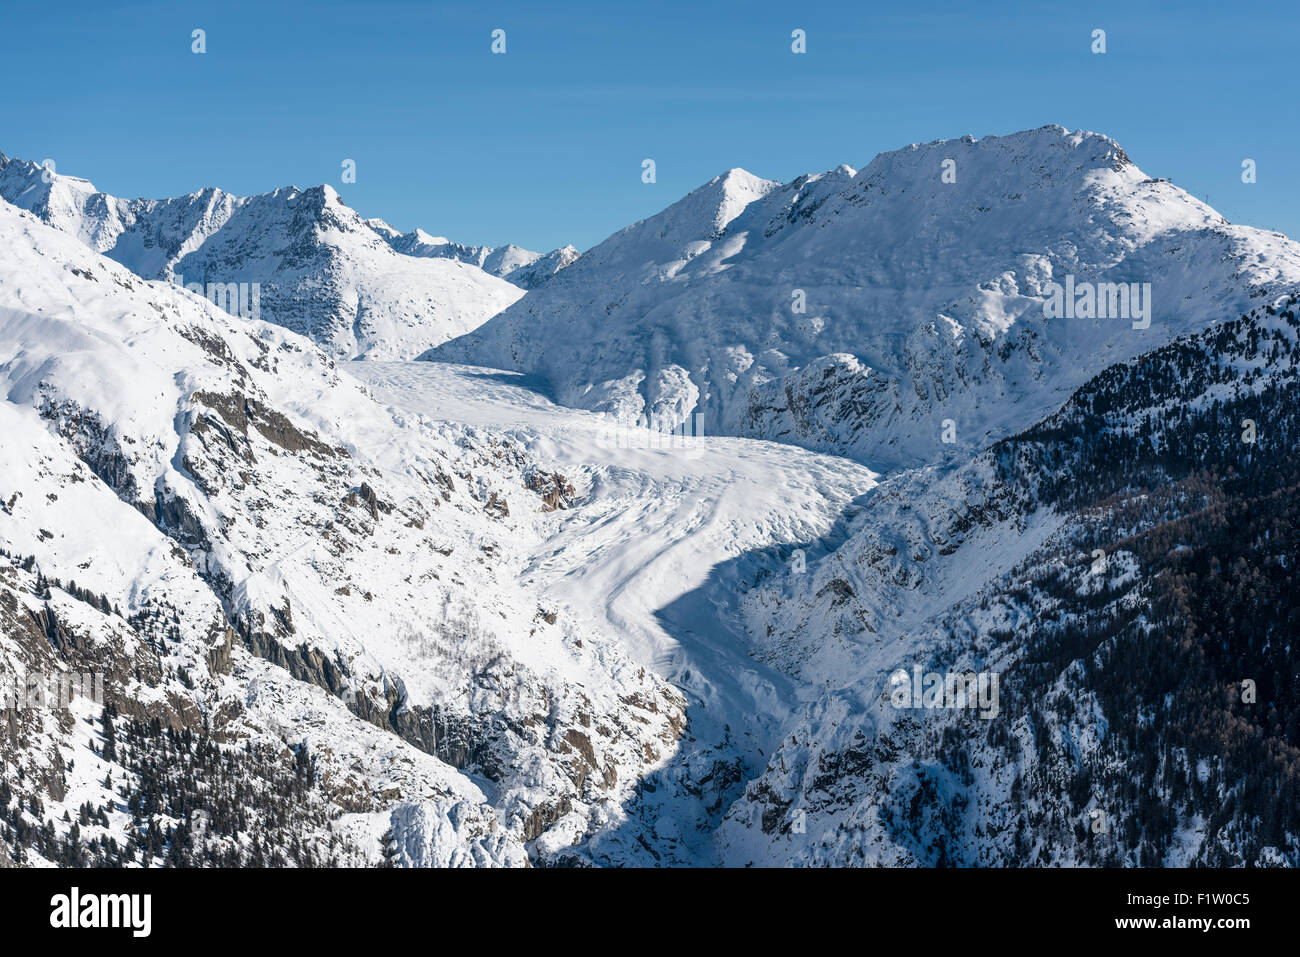 Southernmost part of the glacier tongue of the Great Aletsch Glacier, Switzerland's largest glacier, during winter. Stock Photo